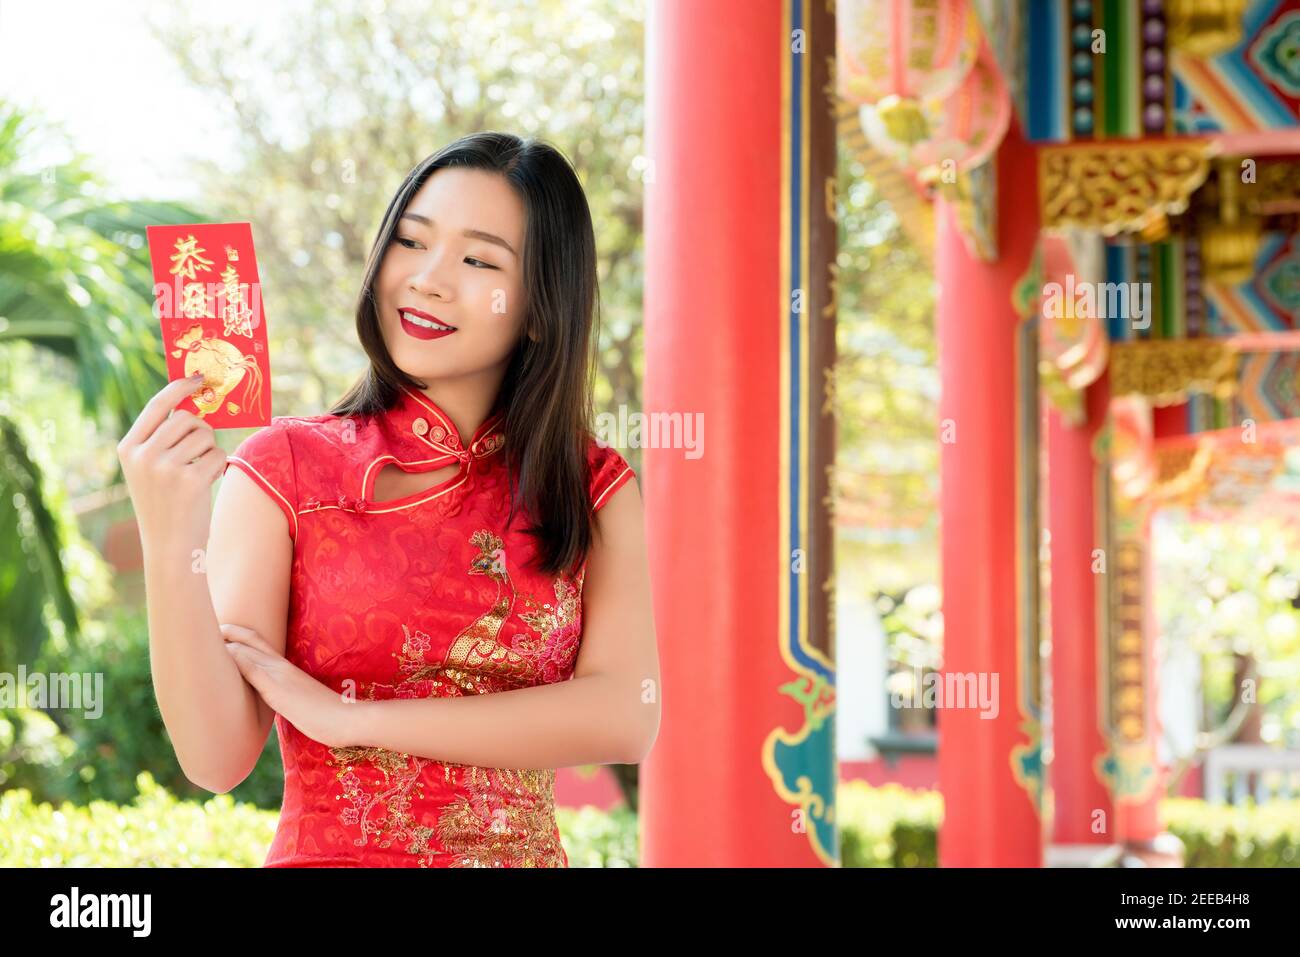 Smiling Asian woman in traditional red cheongsam qipao dress showing Chinese New Year greeting text sign said 'be rich and wealthy' Stock Photo